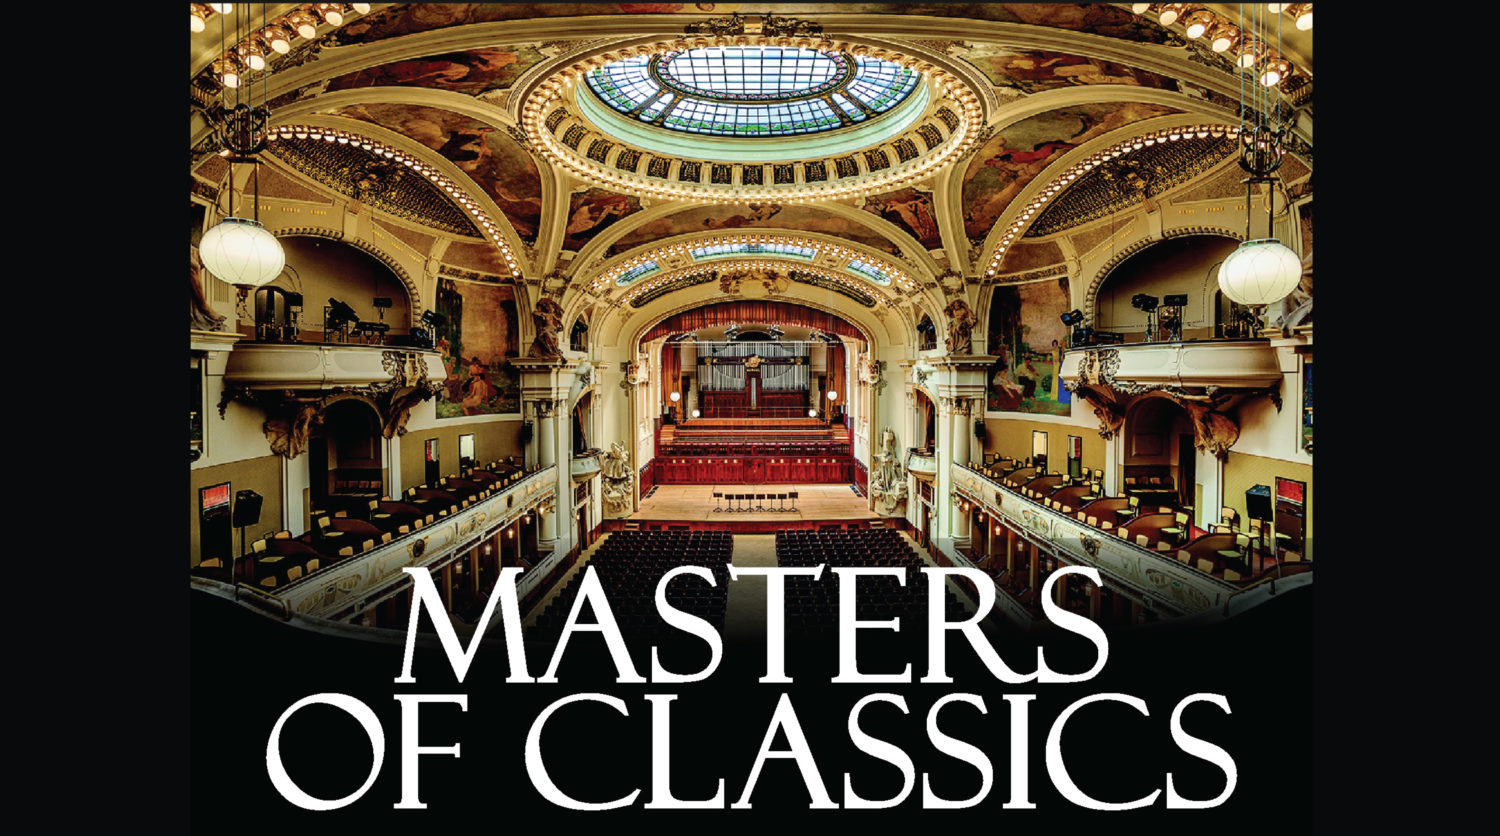 MASTERS OF CLASSICS IN THE MUNICIPAL HOUSE 23.04.2019